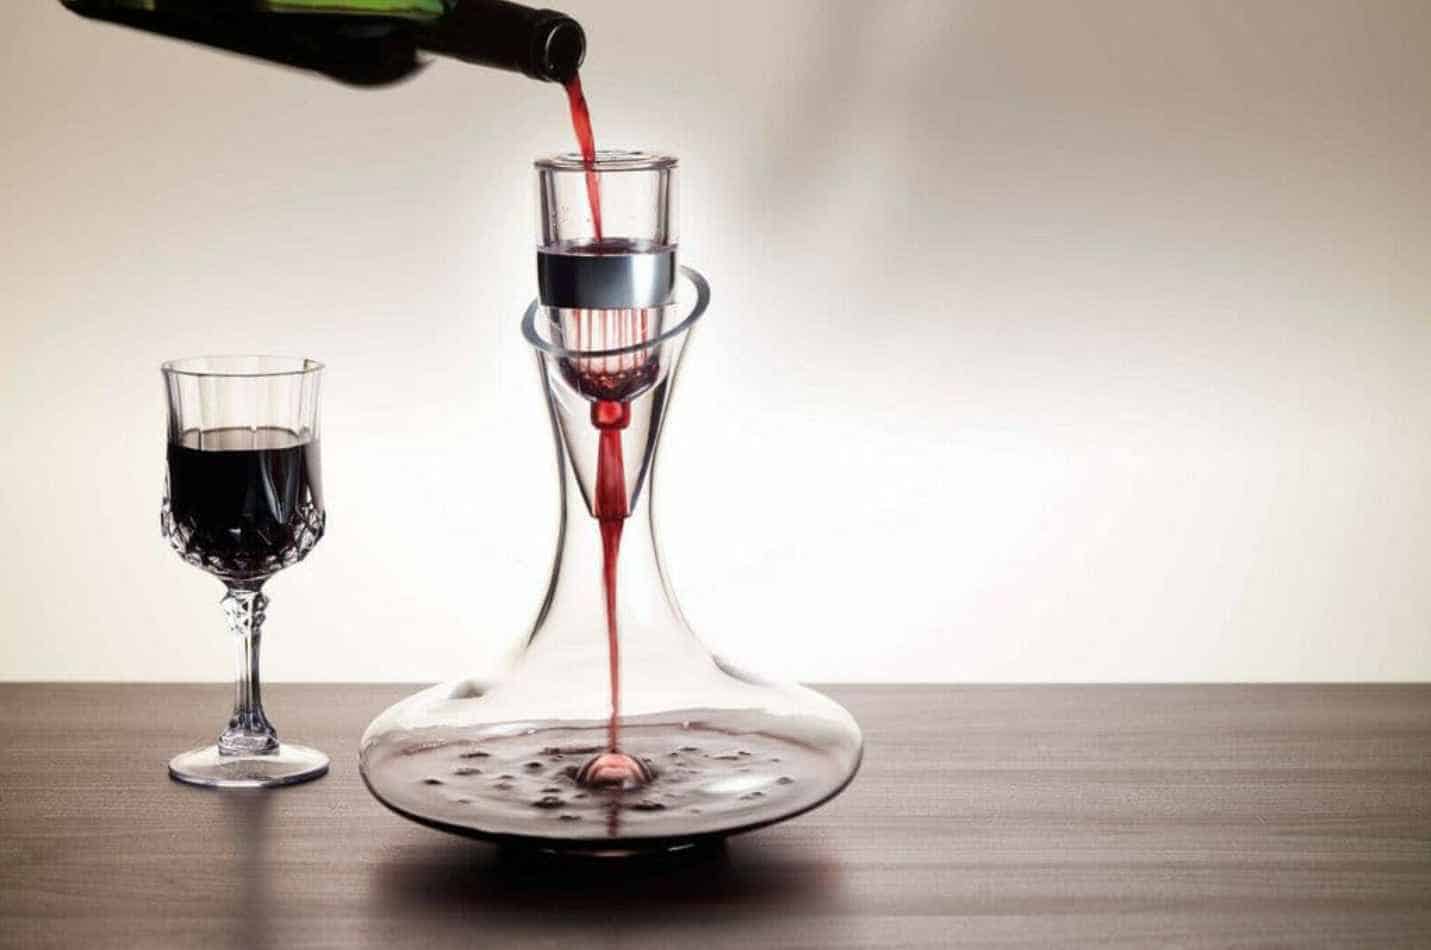 What to Look for in a Wine Aerator